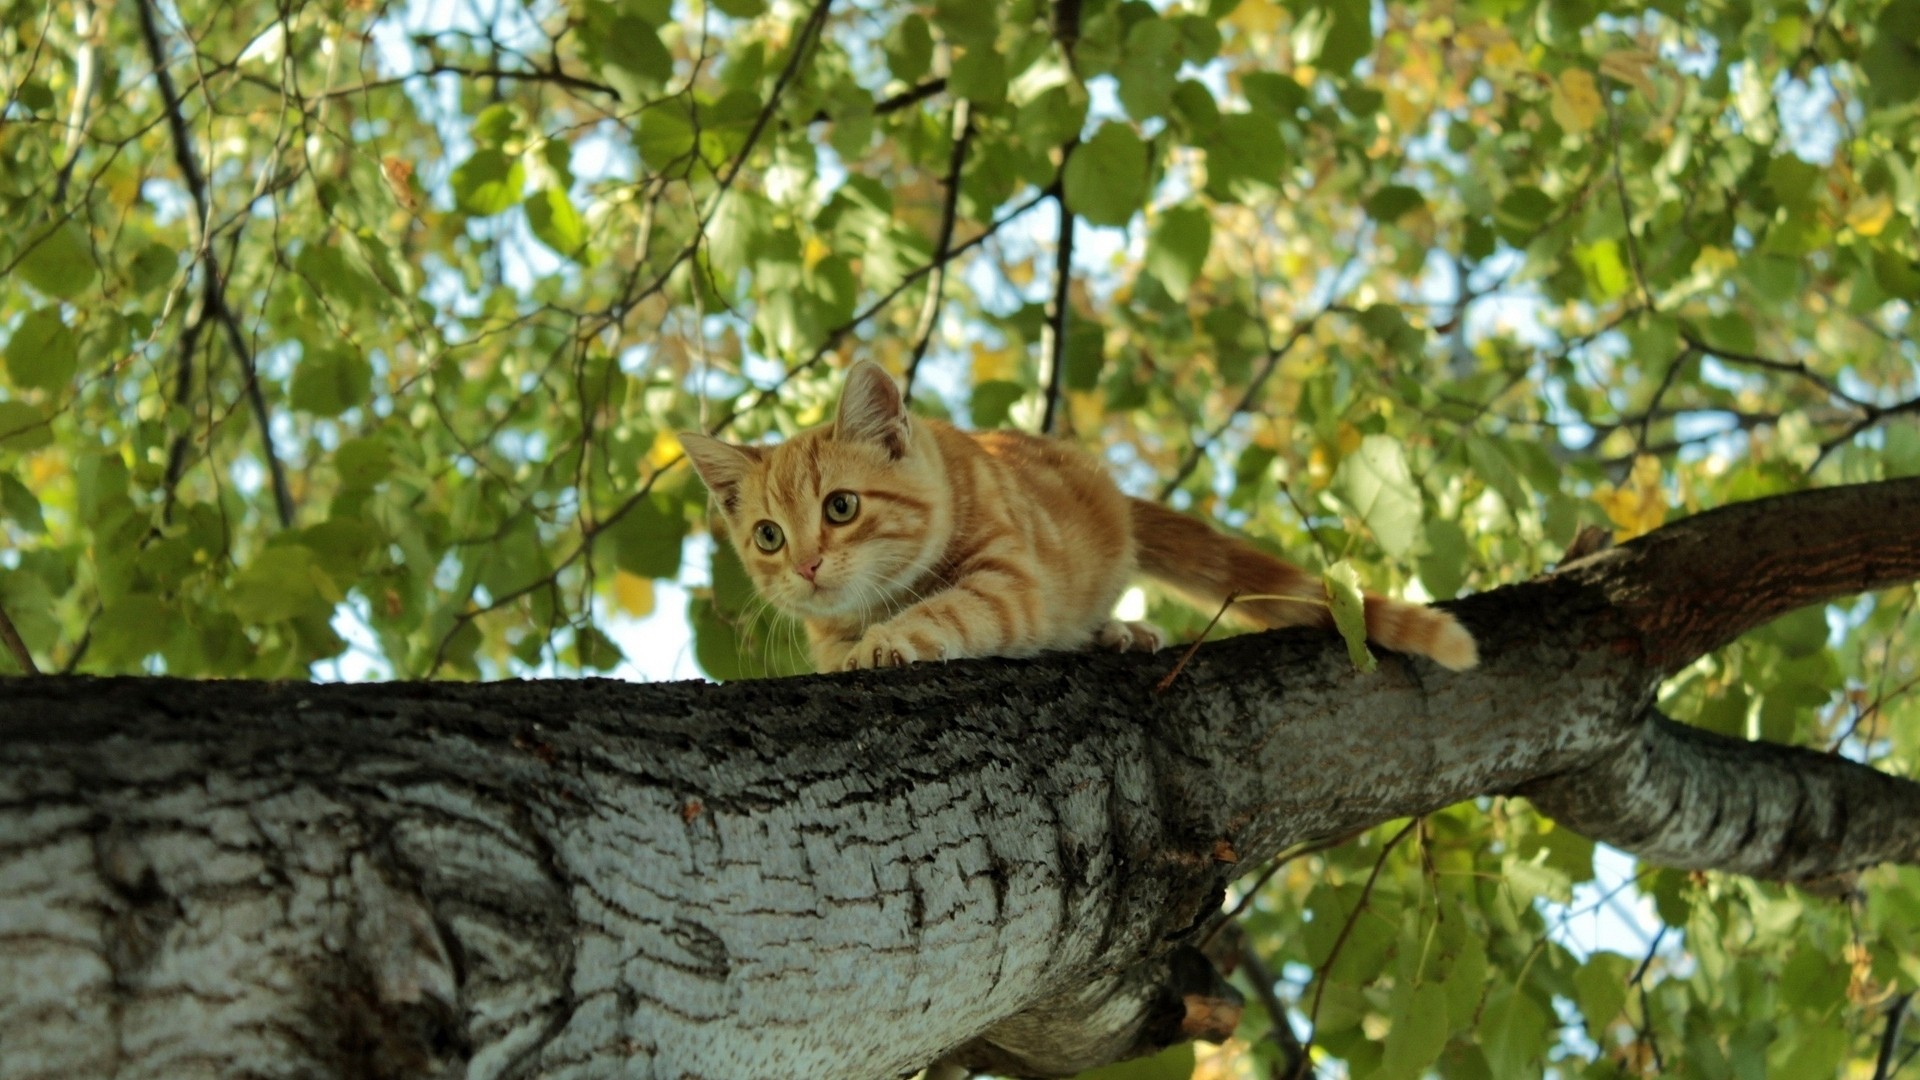 General 1920x1080 animals cats trees worm's eye view low-angle feline mammals climbing tree trunk outdoors nature leaves sunlight fur whiskers branch claws looking away